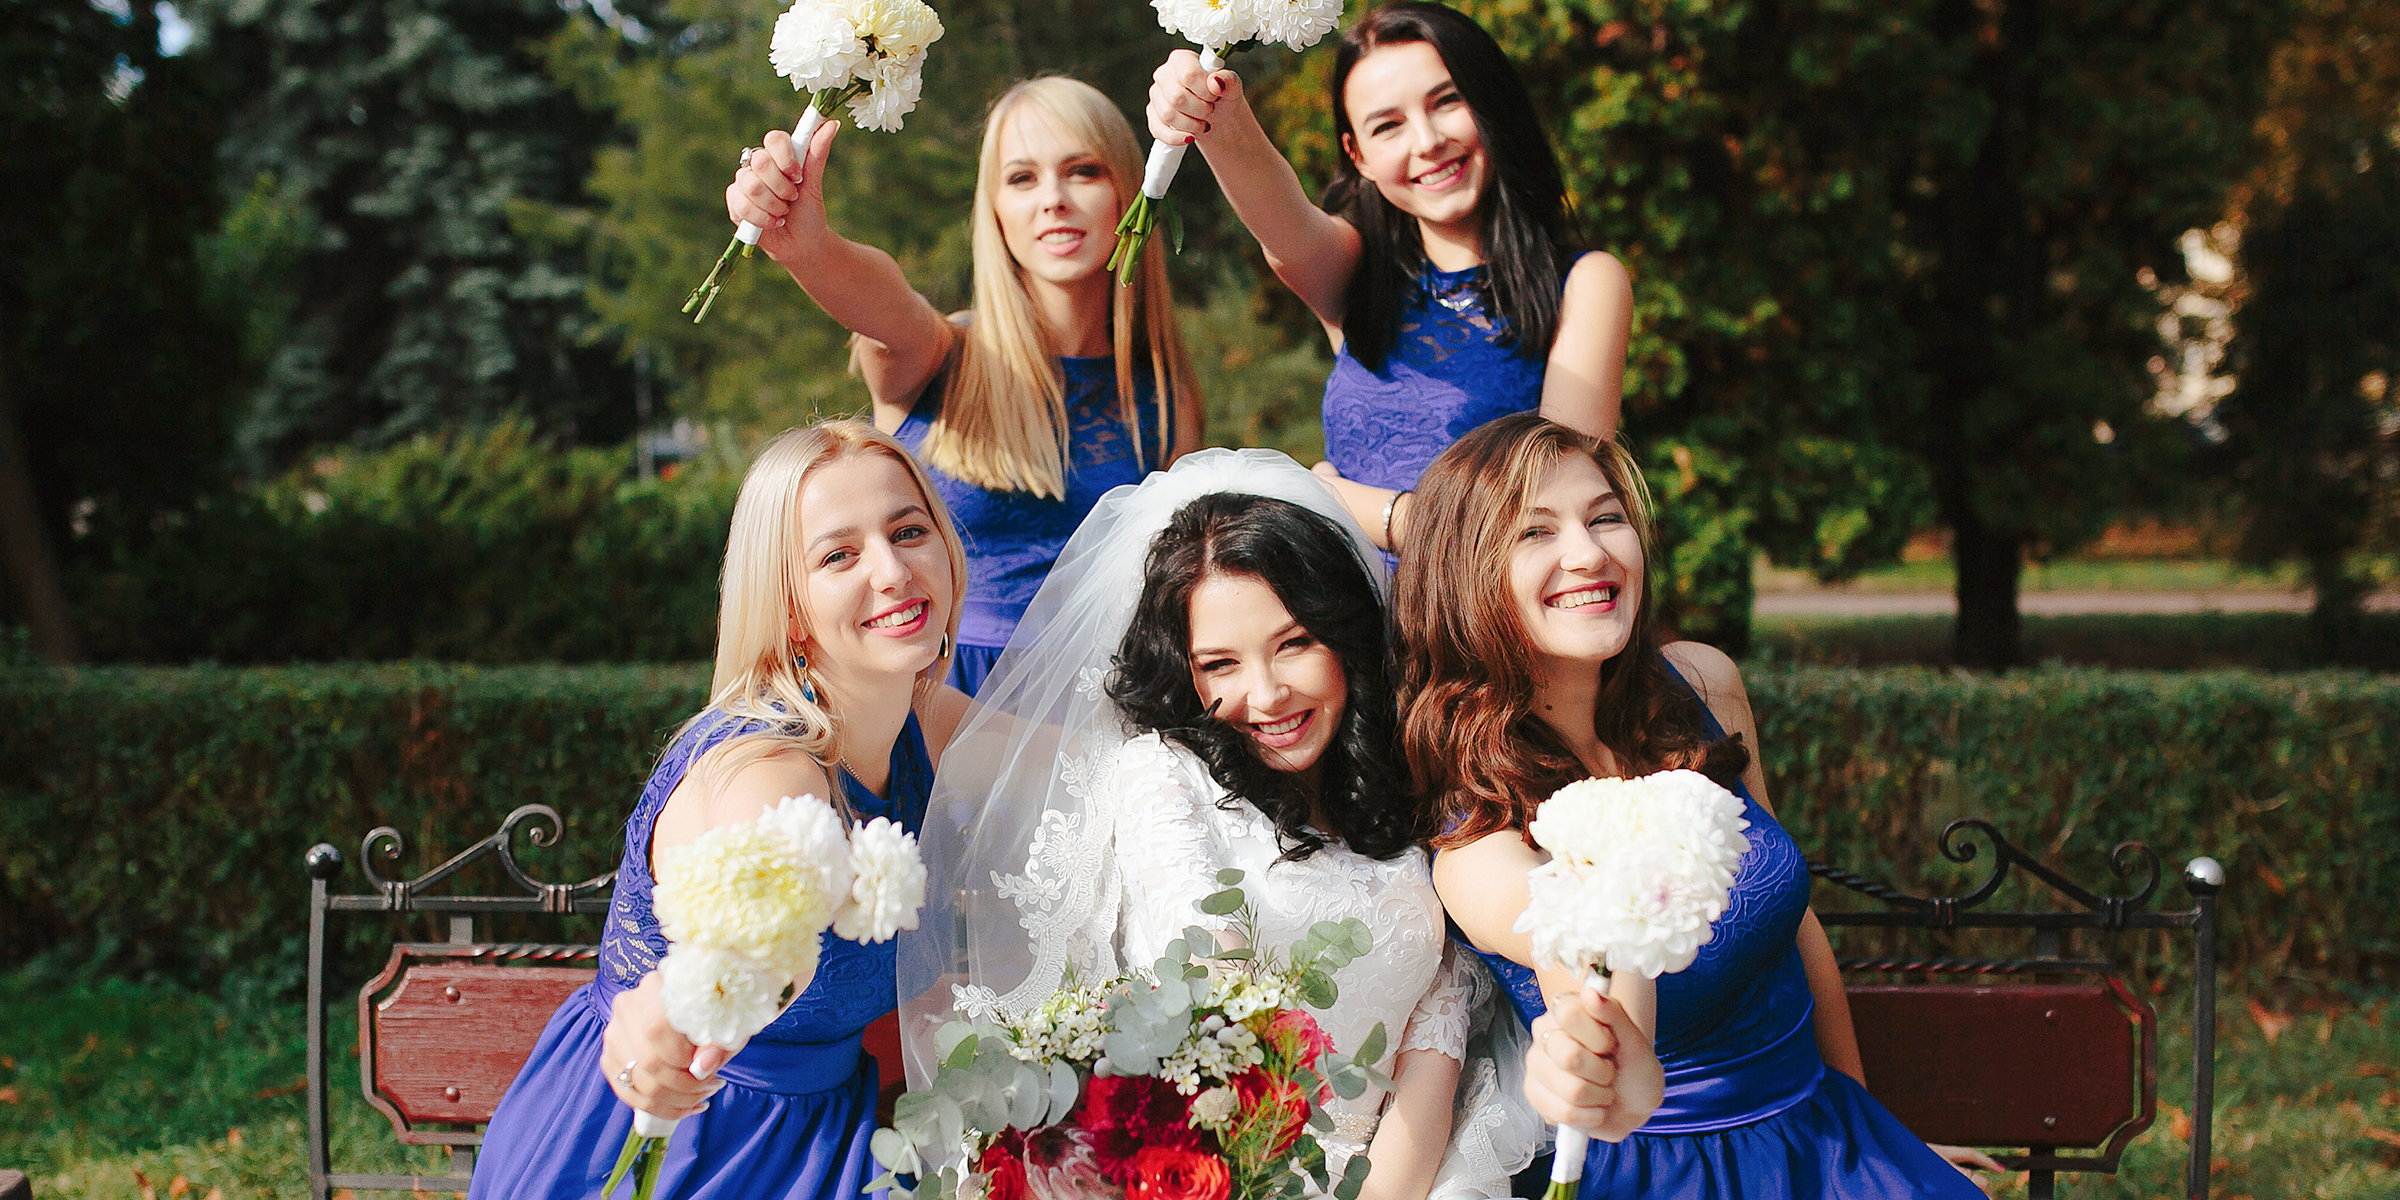 A happy bride surrounded by her bridesmaids | Source: Freepik